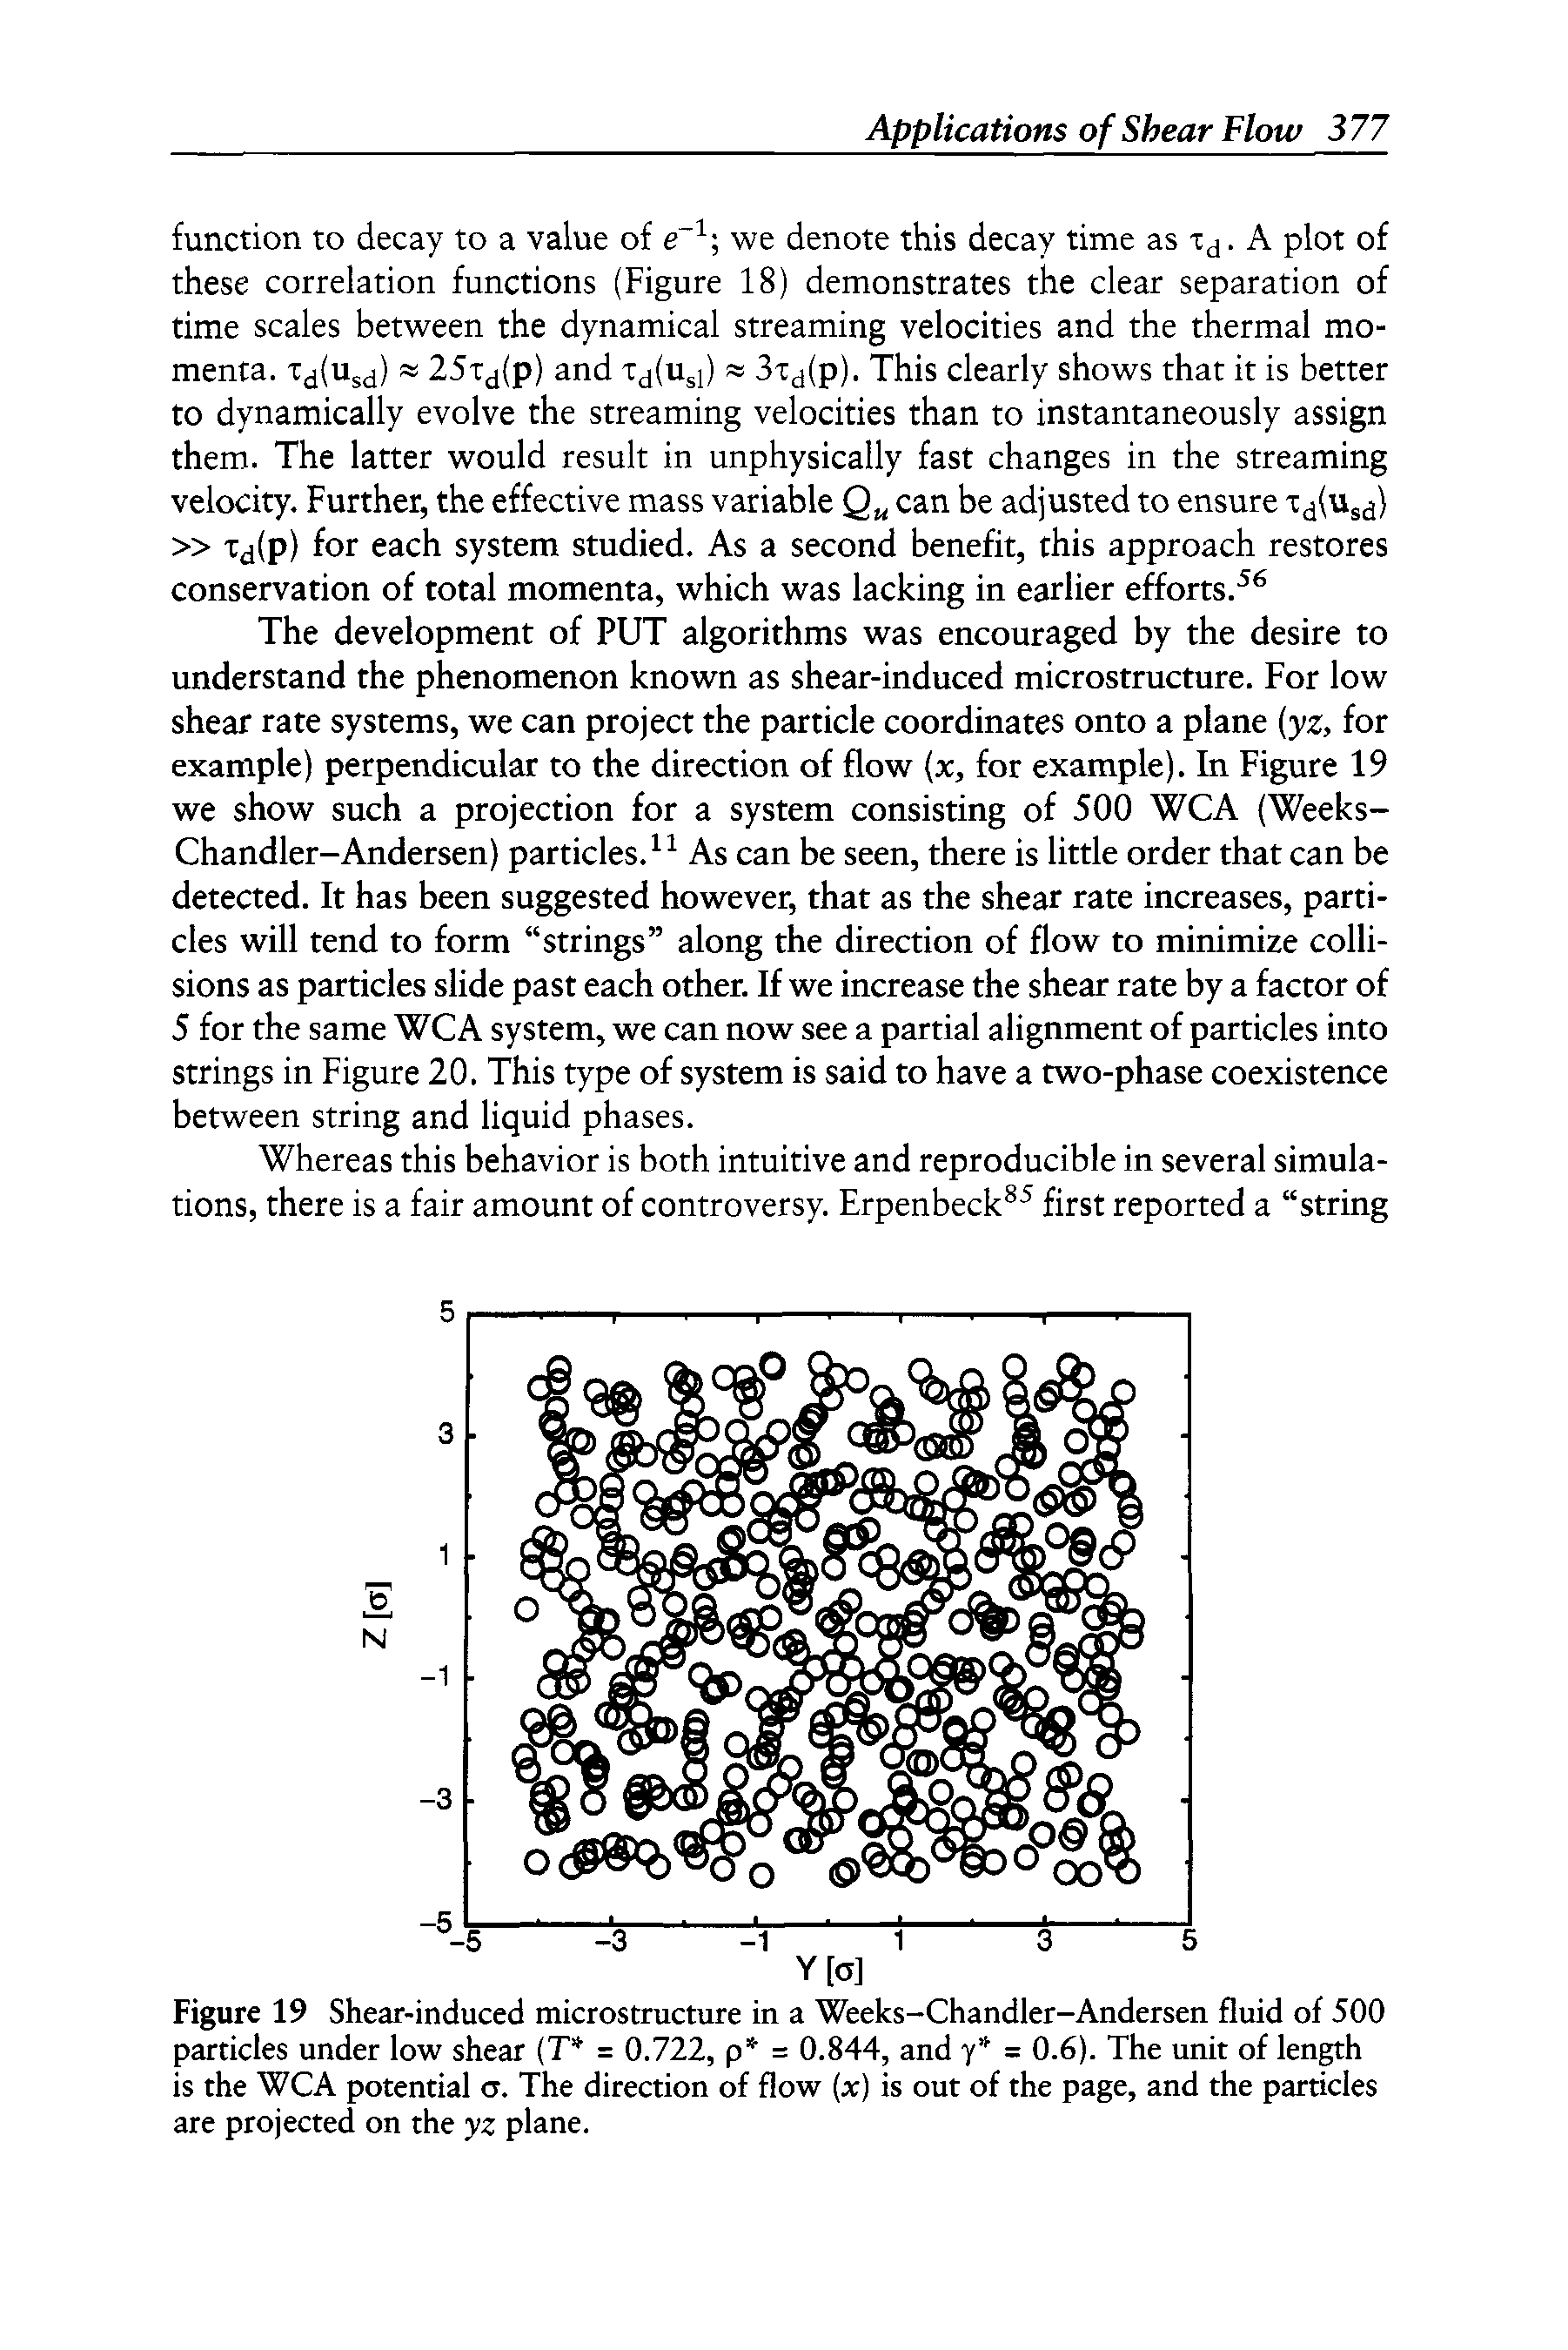 Figure 19 Shear-induced microstructure in a Weeks-Chandler-Andersen fluid of 500 particles under low shear (T = 0.722, p = 0.844, and y = 0.6). The unit of length is the WCA potential a. The direction of flow (x) is out of the page, and the particles are projected on the yz plane.